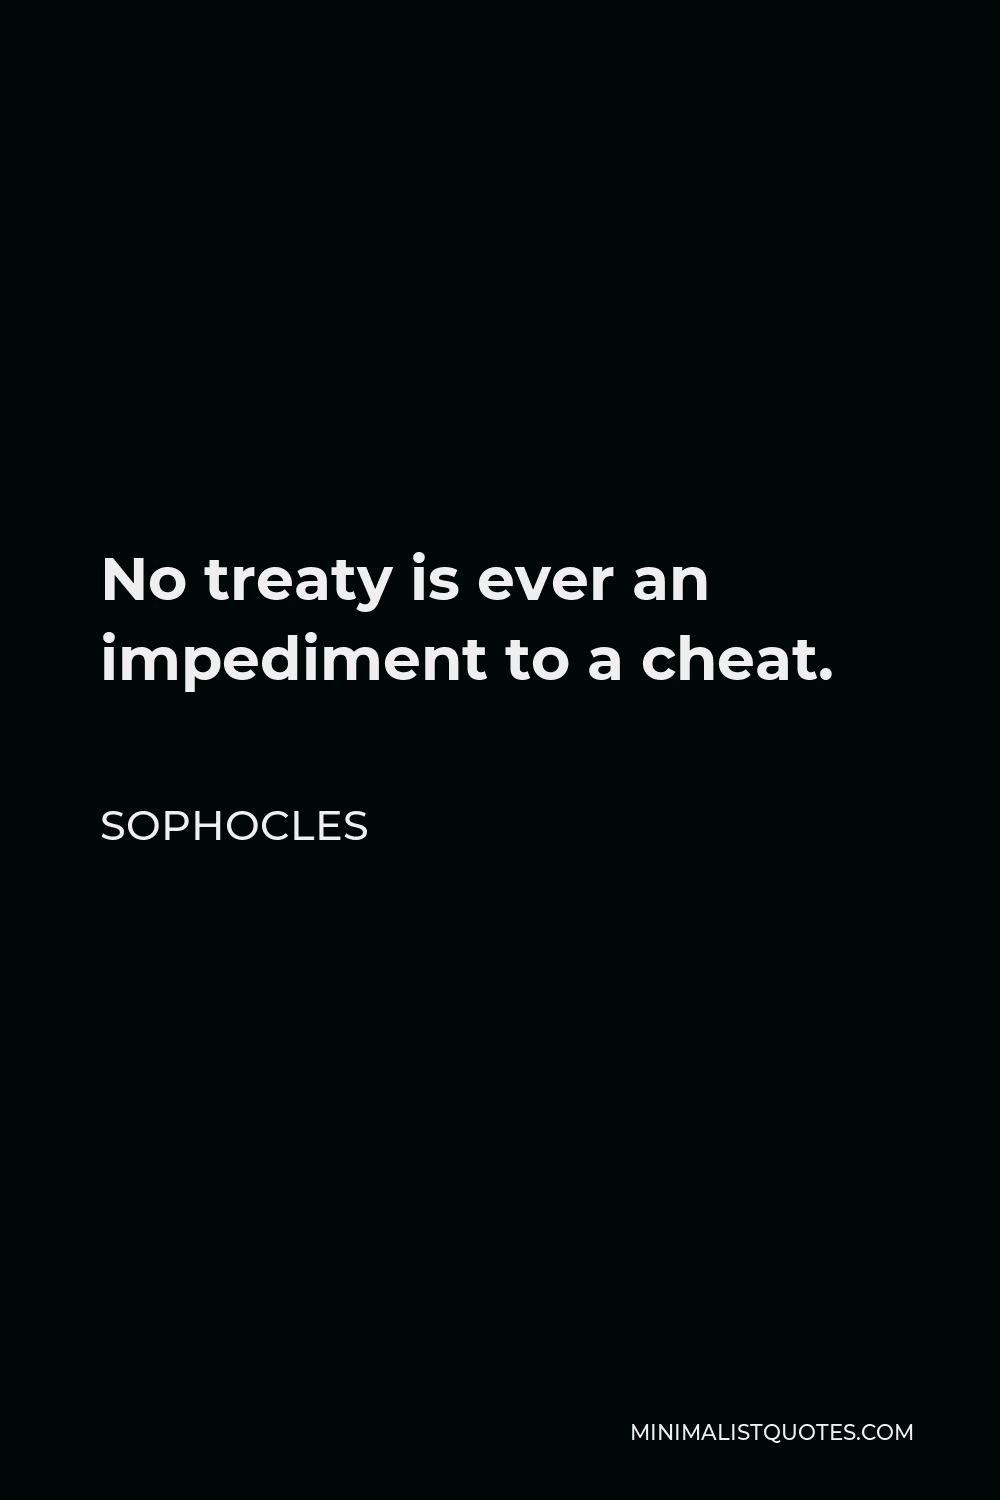 Sophocles Quote - No treaty is ever an impediment to a cheat.